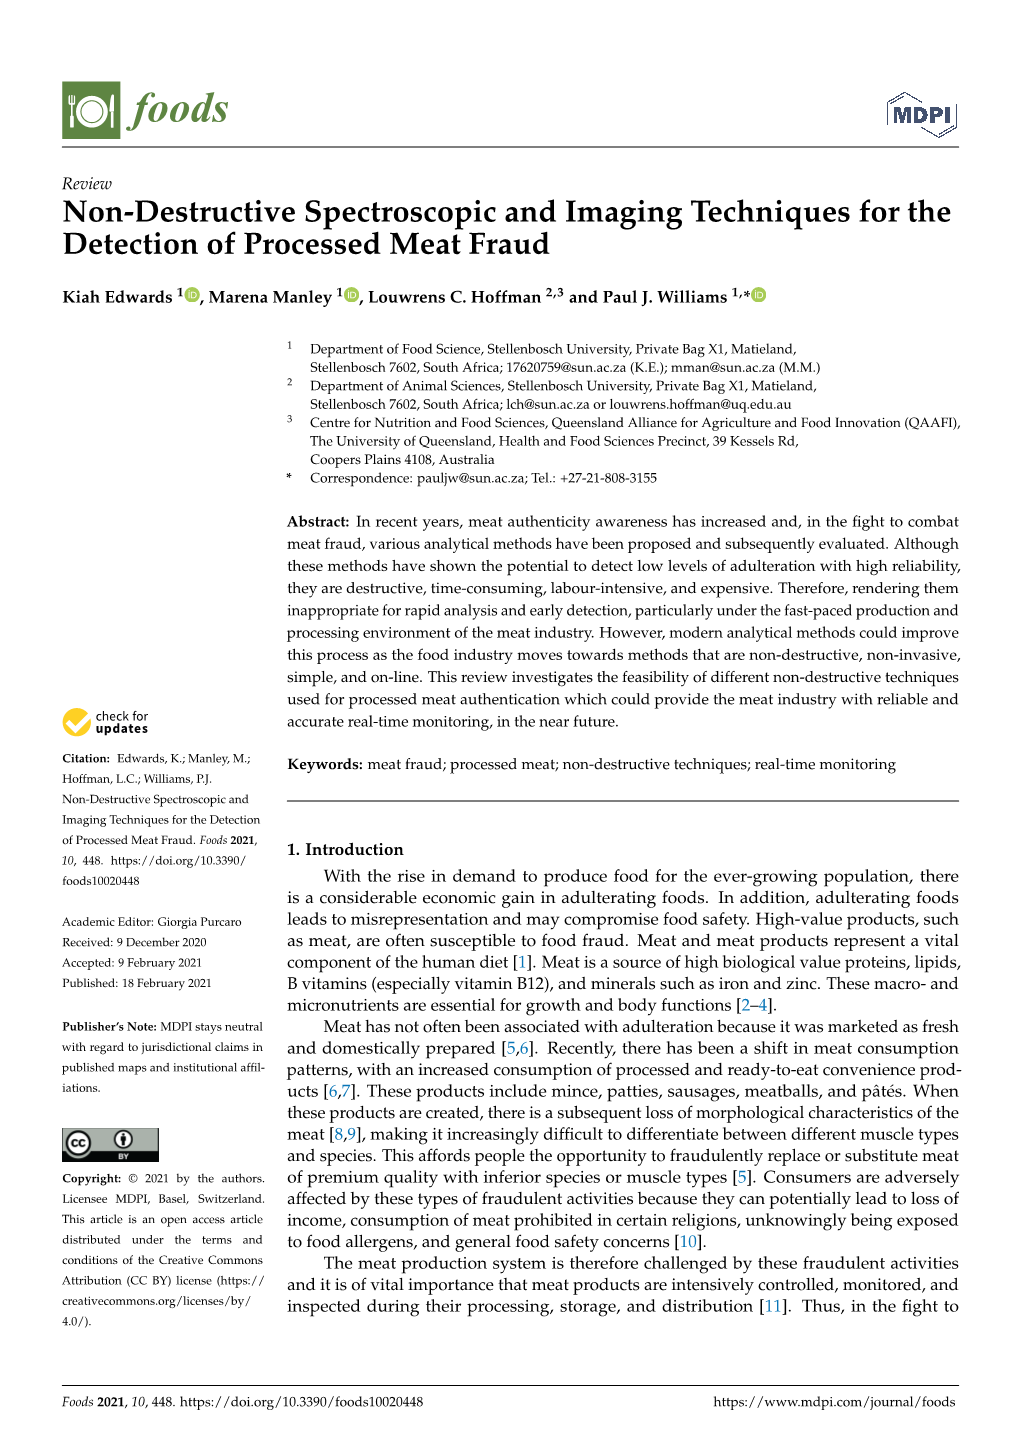 Non-Destructive Spectroscopic and Imaging Techniques for the Detection of Processed Meat Fraud